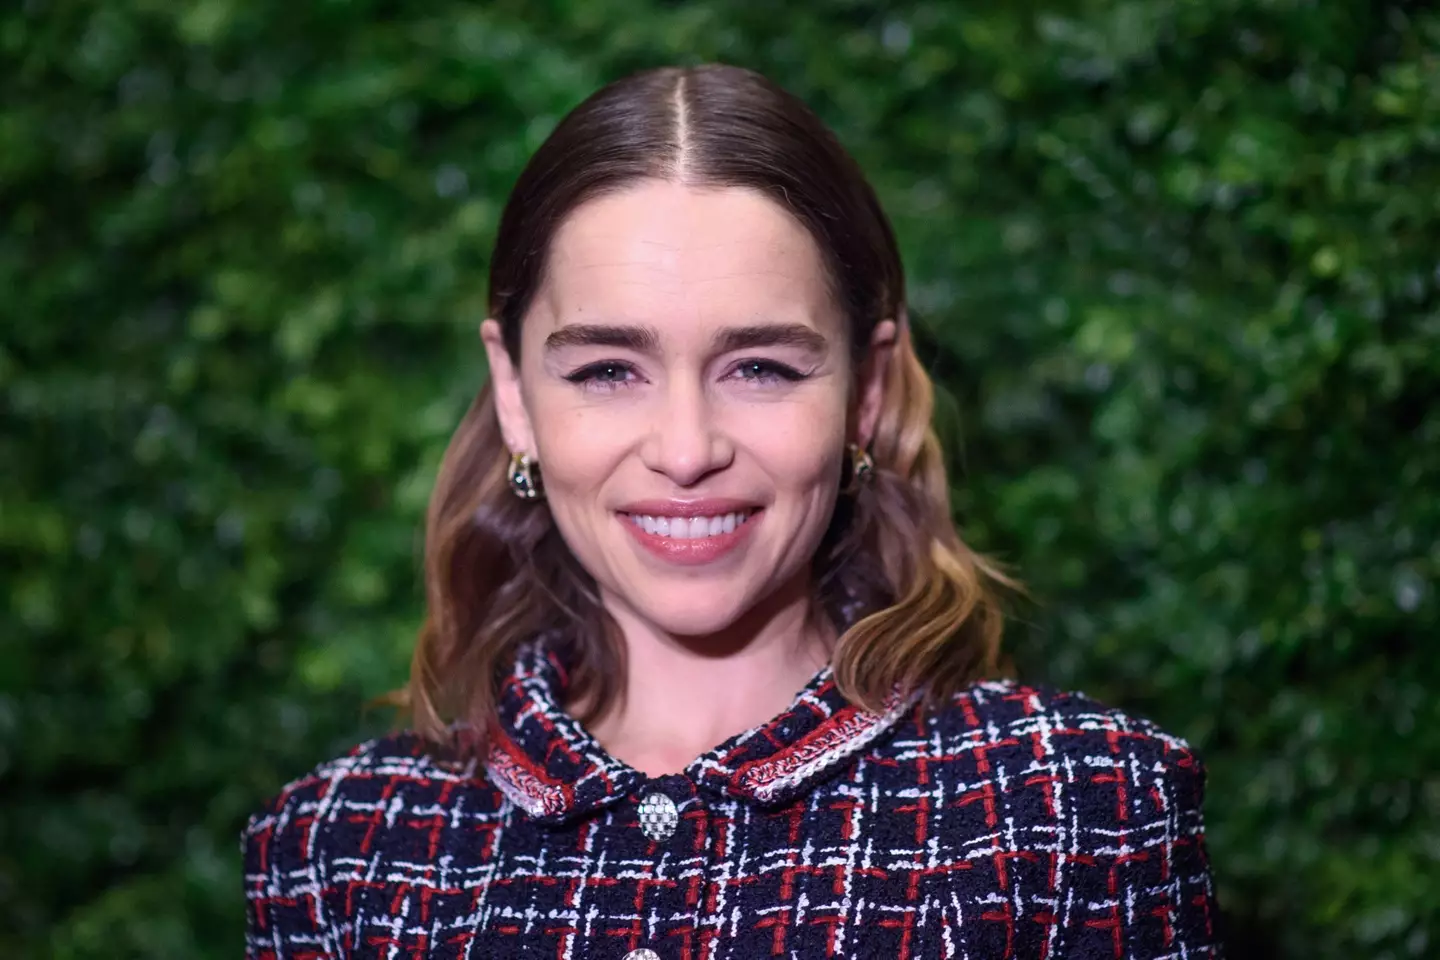 Emilia Clarke can't watch House of the Dragon.